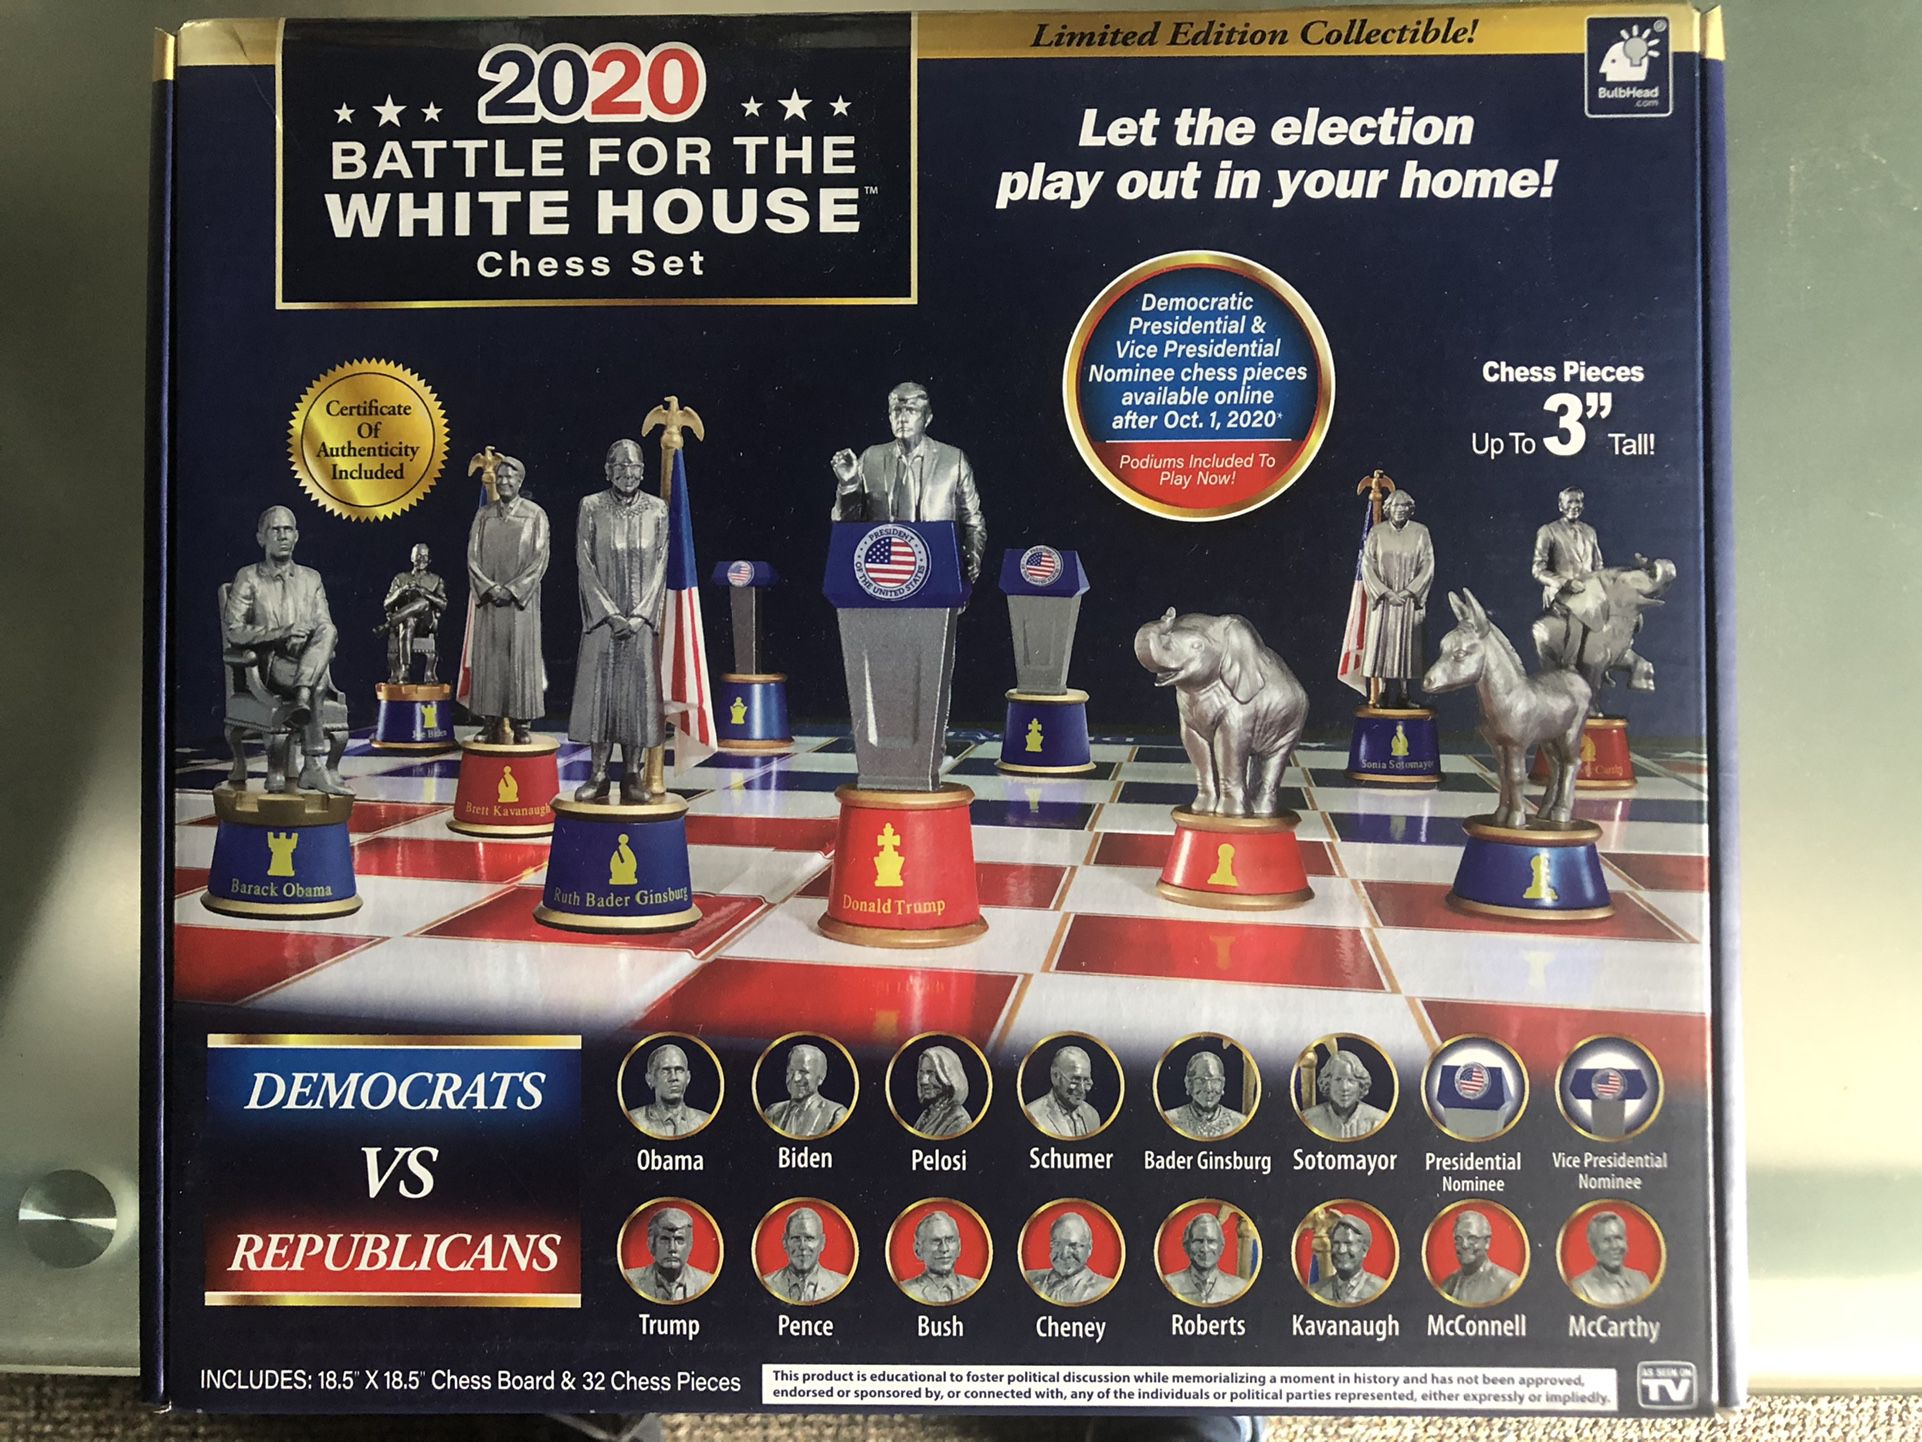  Brand New 2020 Battle For The White House Chess Set.  Trump